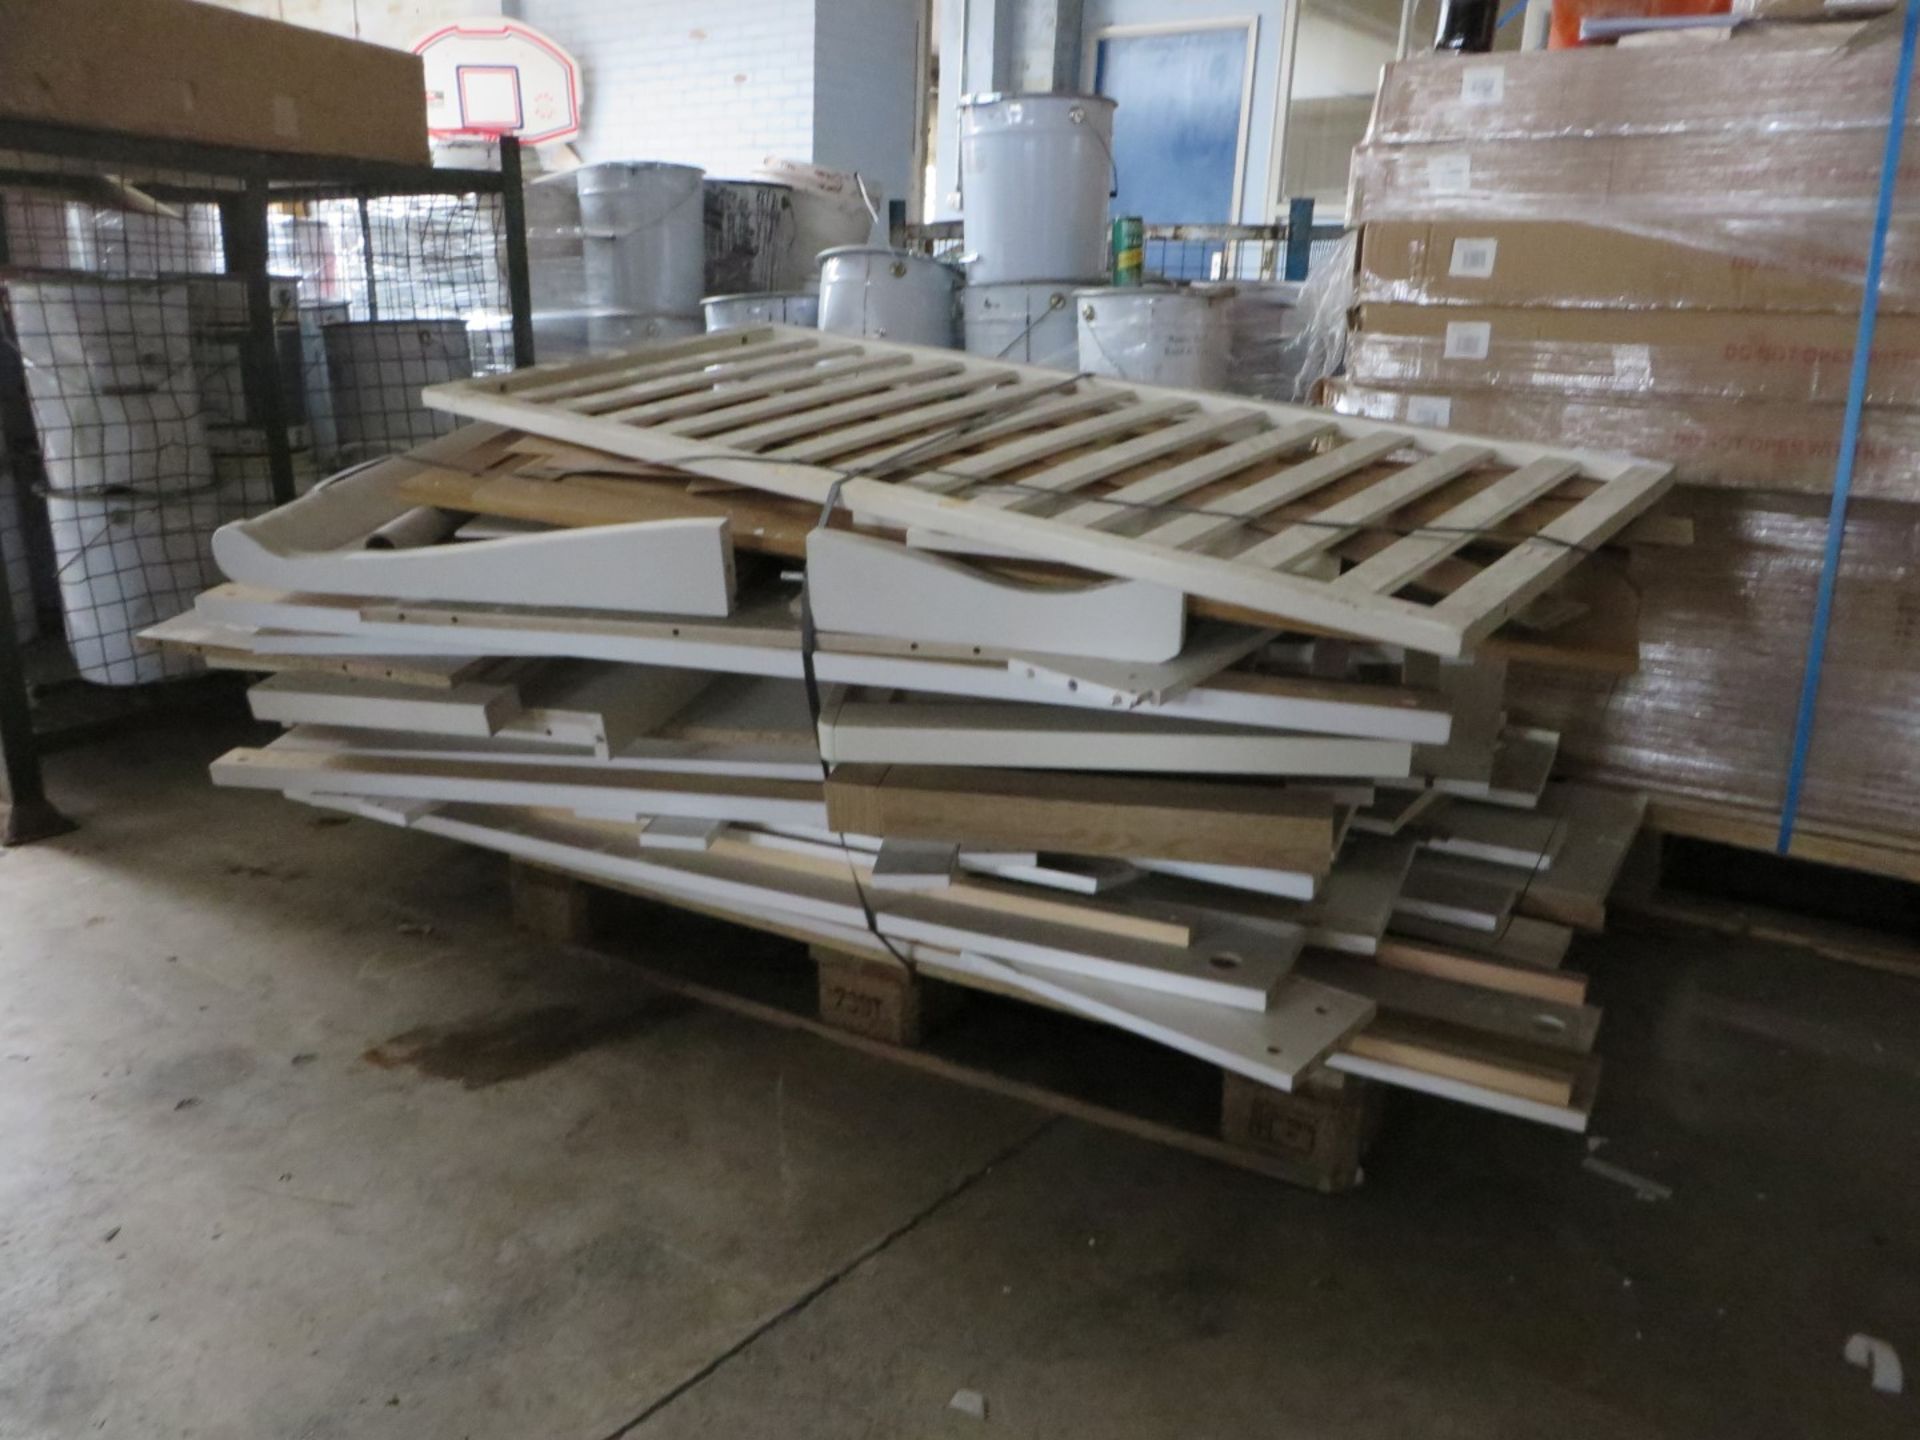 12 x Pallets of Assorted Silver Cross Nursery Furniture - CL185 - Ref: DSYMULTI - Location: Stoke-on - Image 9 of 13